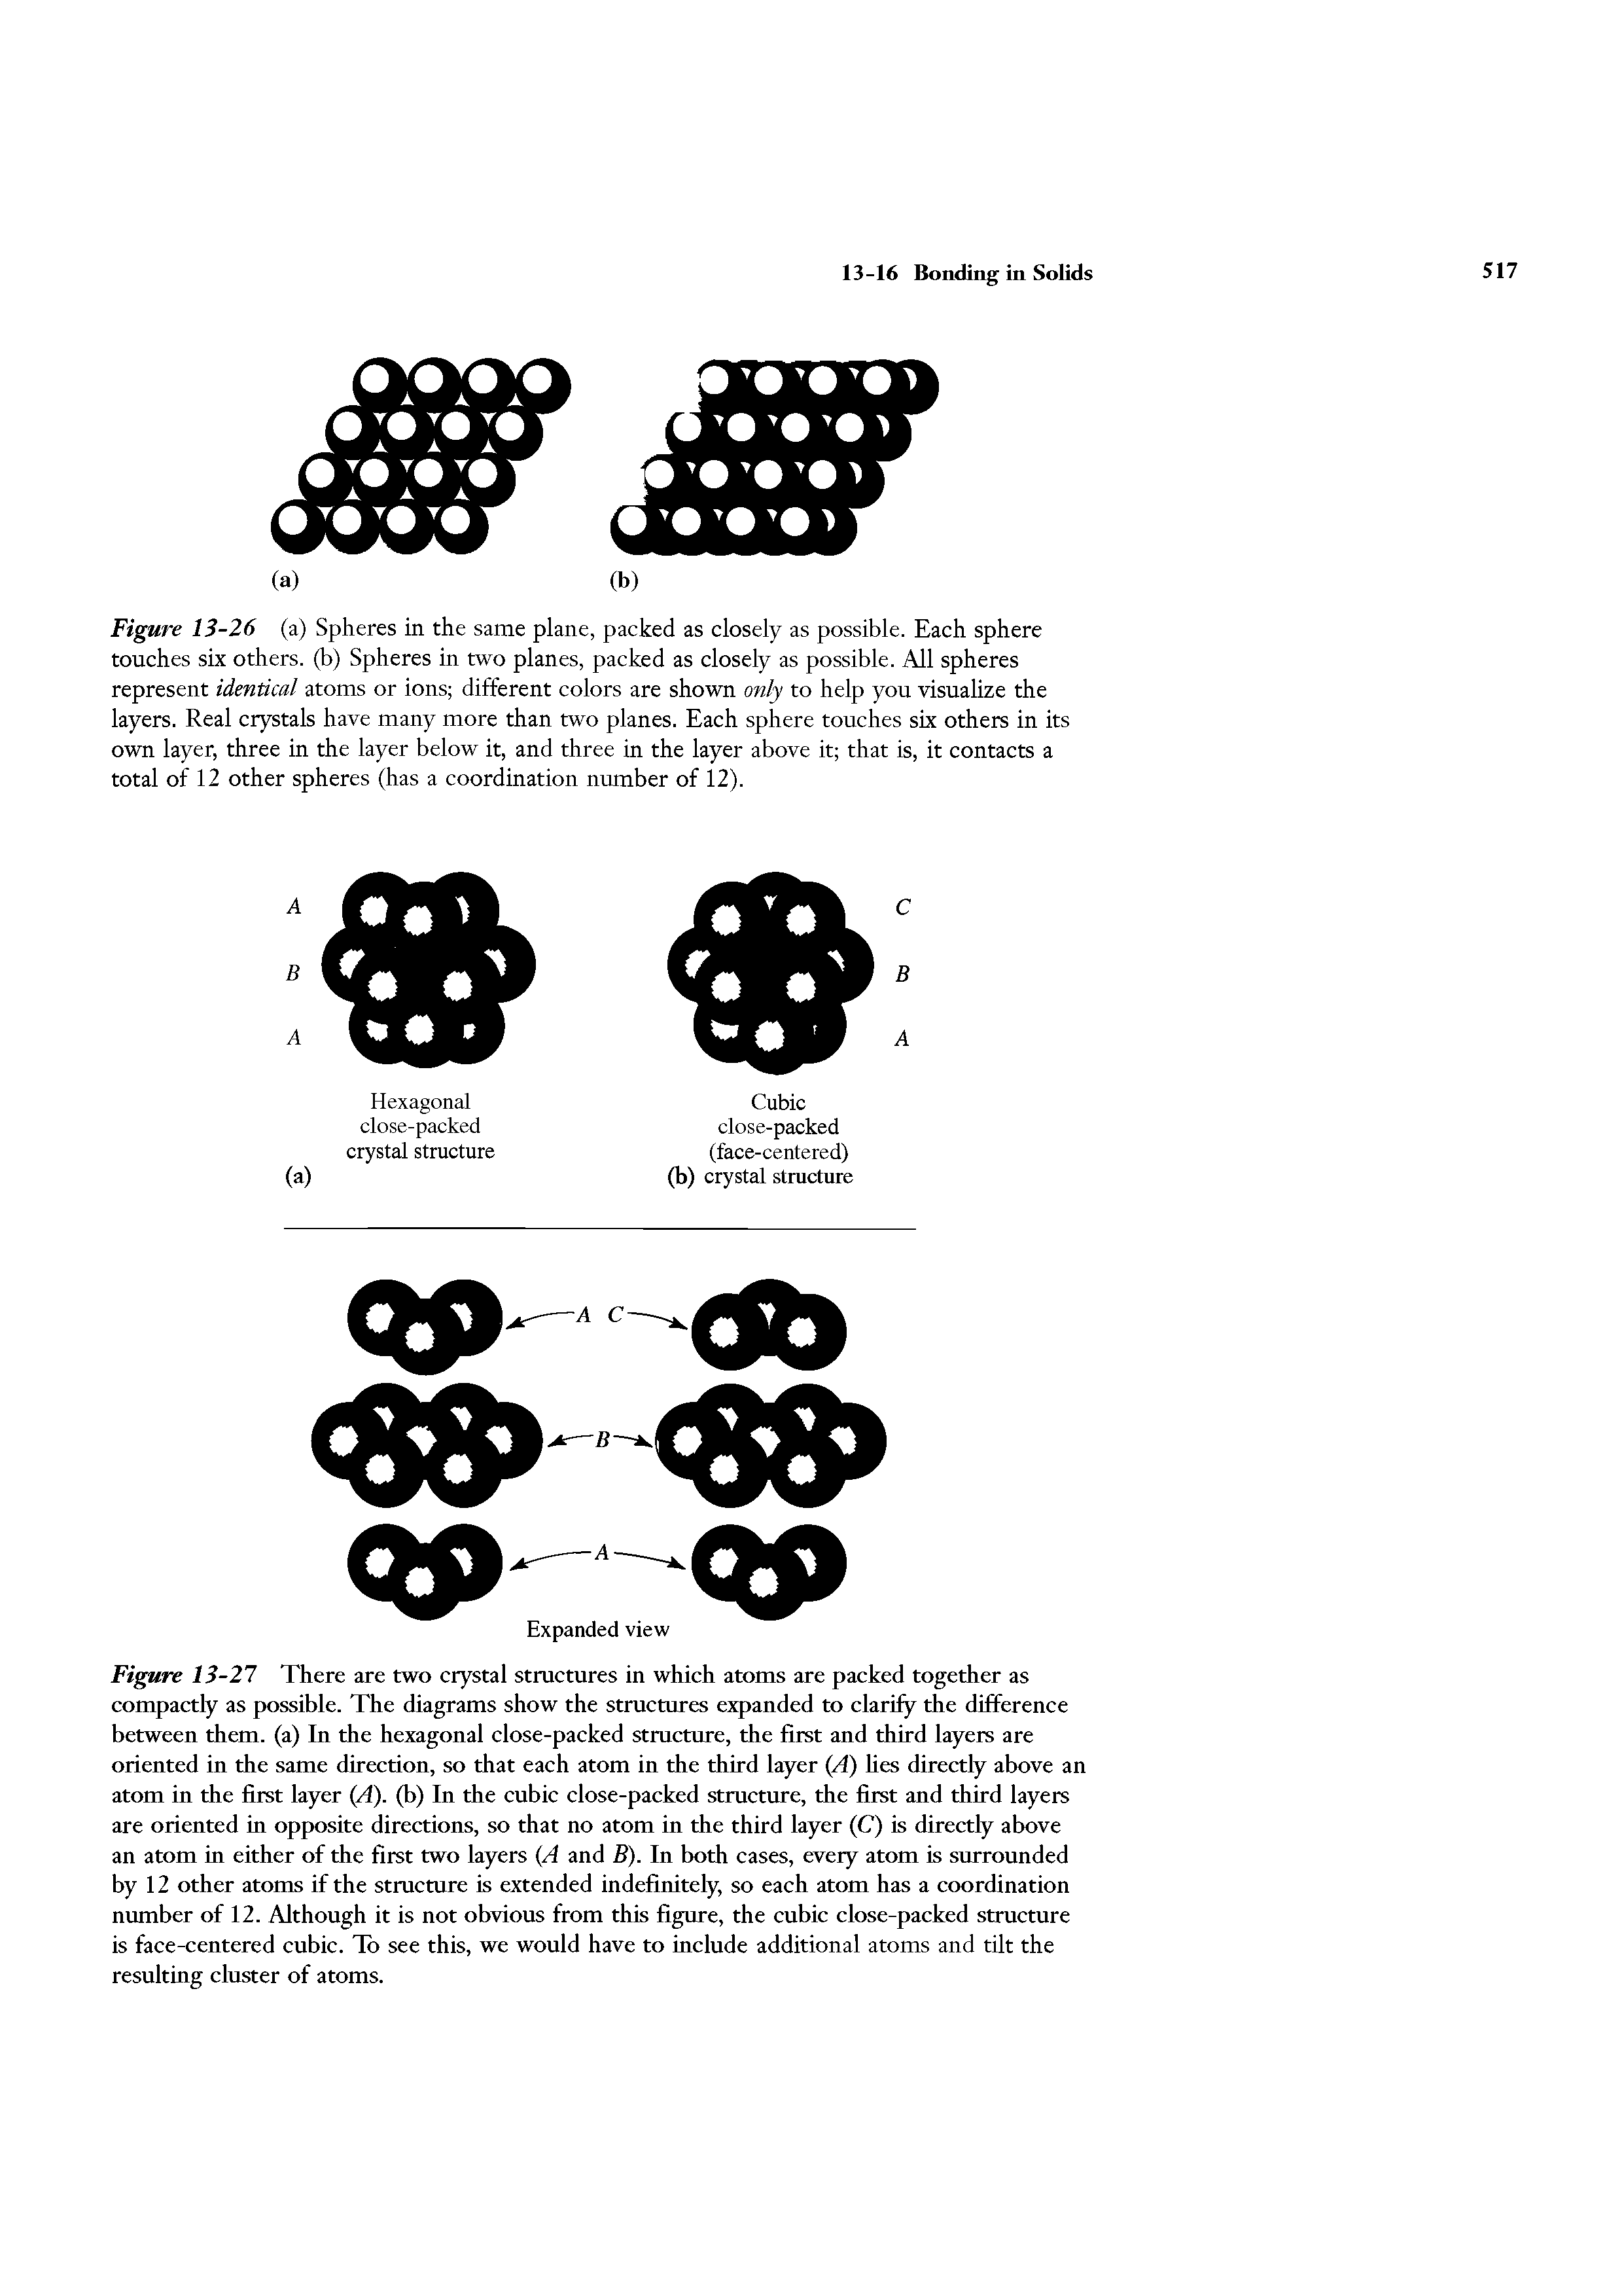 Figure 13-27 There are two crystal structures in which atoms are packed together as compactly as possible. The diagrams show the structures expanded to clarify the difference between them, (a) In the hexagonal close-packed structure, the first and third layers are oriented in the same direction, so that each atom in the third layer (A) Ues directly above an atom in the first layer A), (b) In the cubic close-packed structure, the first and third layers are oriented in opposite directions, so that no atom in the third layer (C) is directly above an atom in either of the first two layers A and B). In both cases, every atom is surrounded by 12 other atoms if the strucmre is extended indefinitely, so each atom has a coordination number of 12. Although it is not obvious from this figure, the cubic close-packed structure is face-centered cubic. To see this, we would have to include additional atoms and tilt the resulting cluster of atoms.